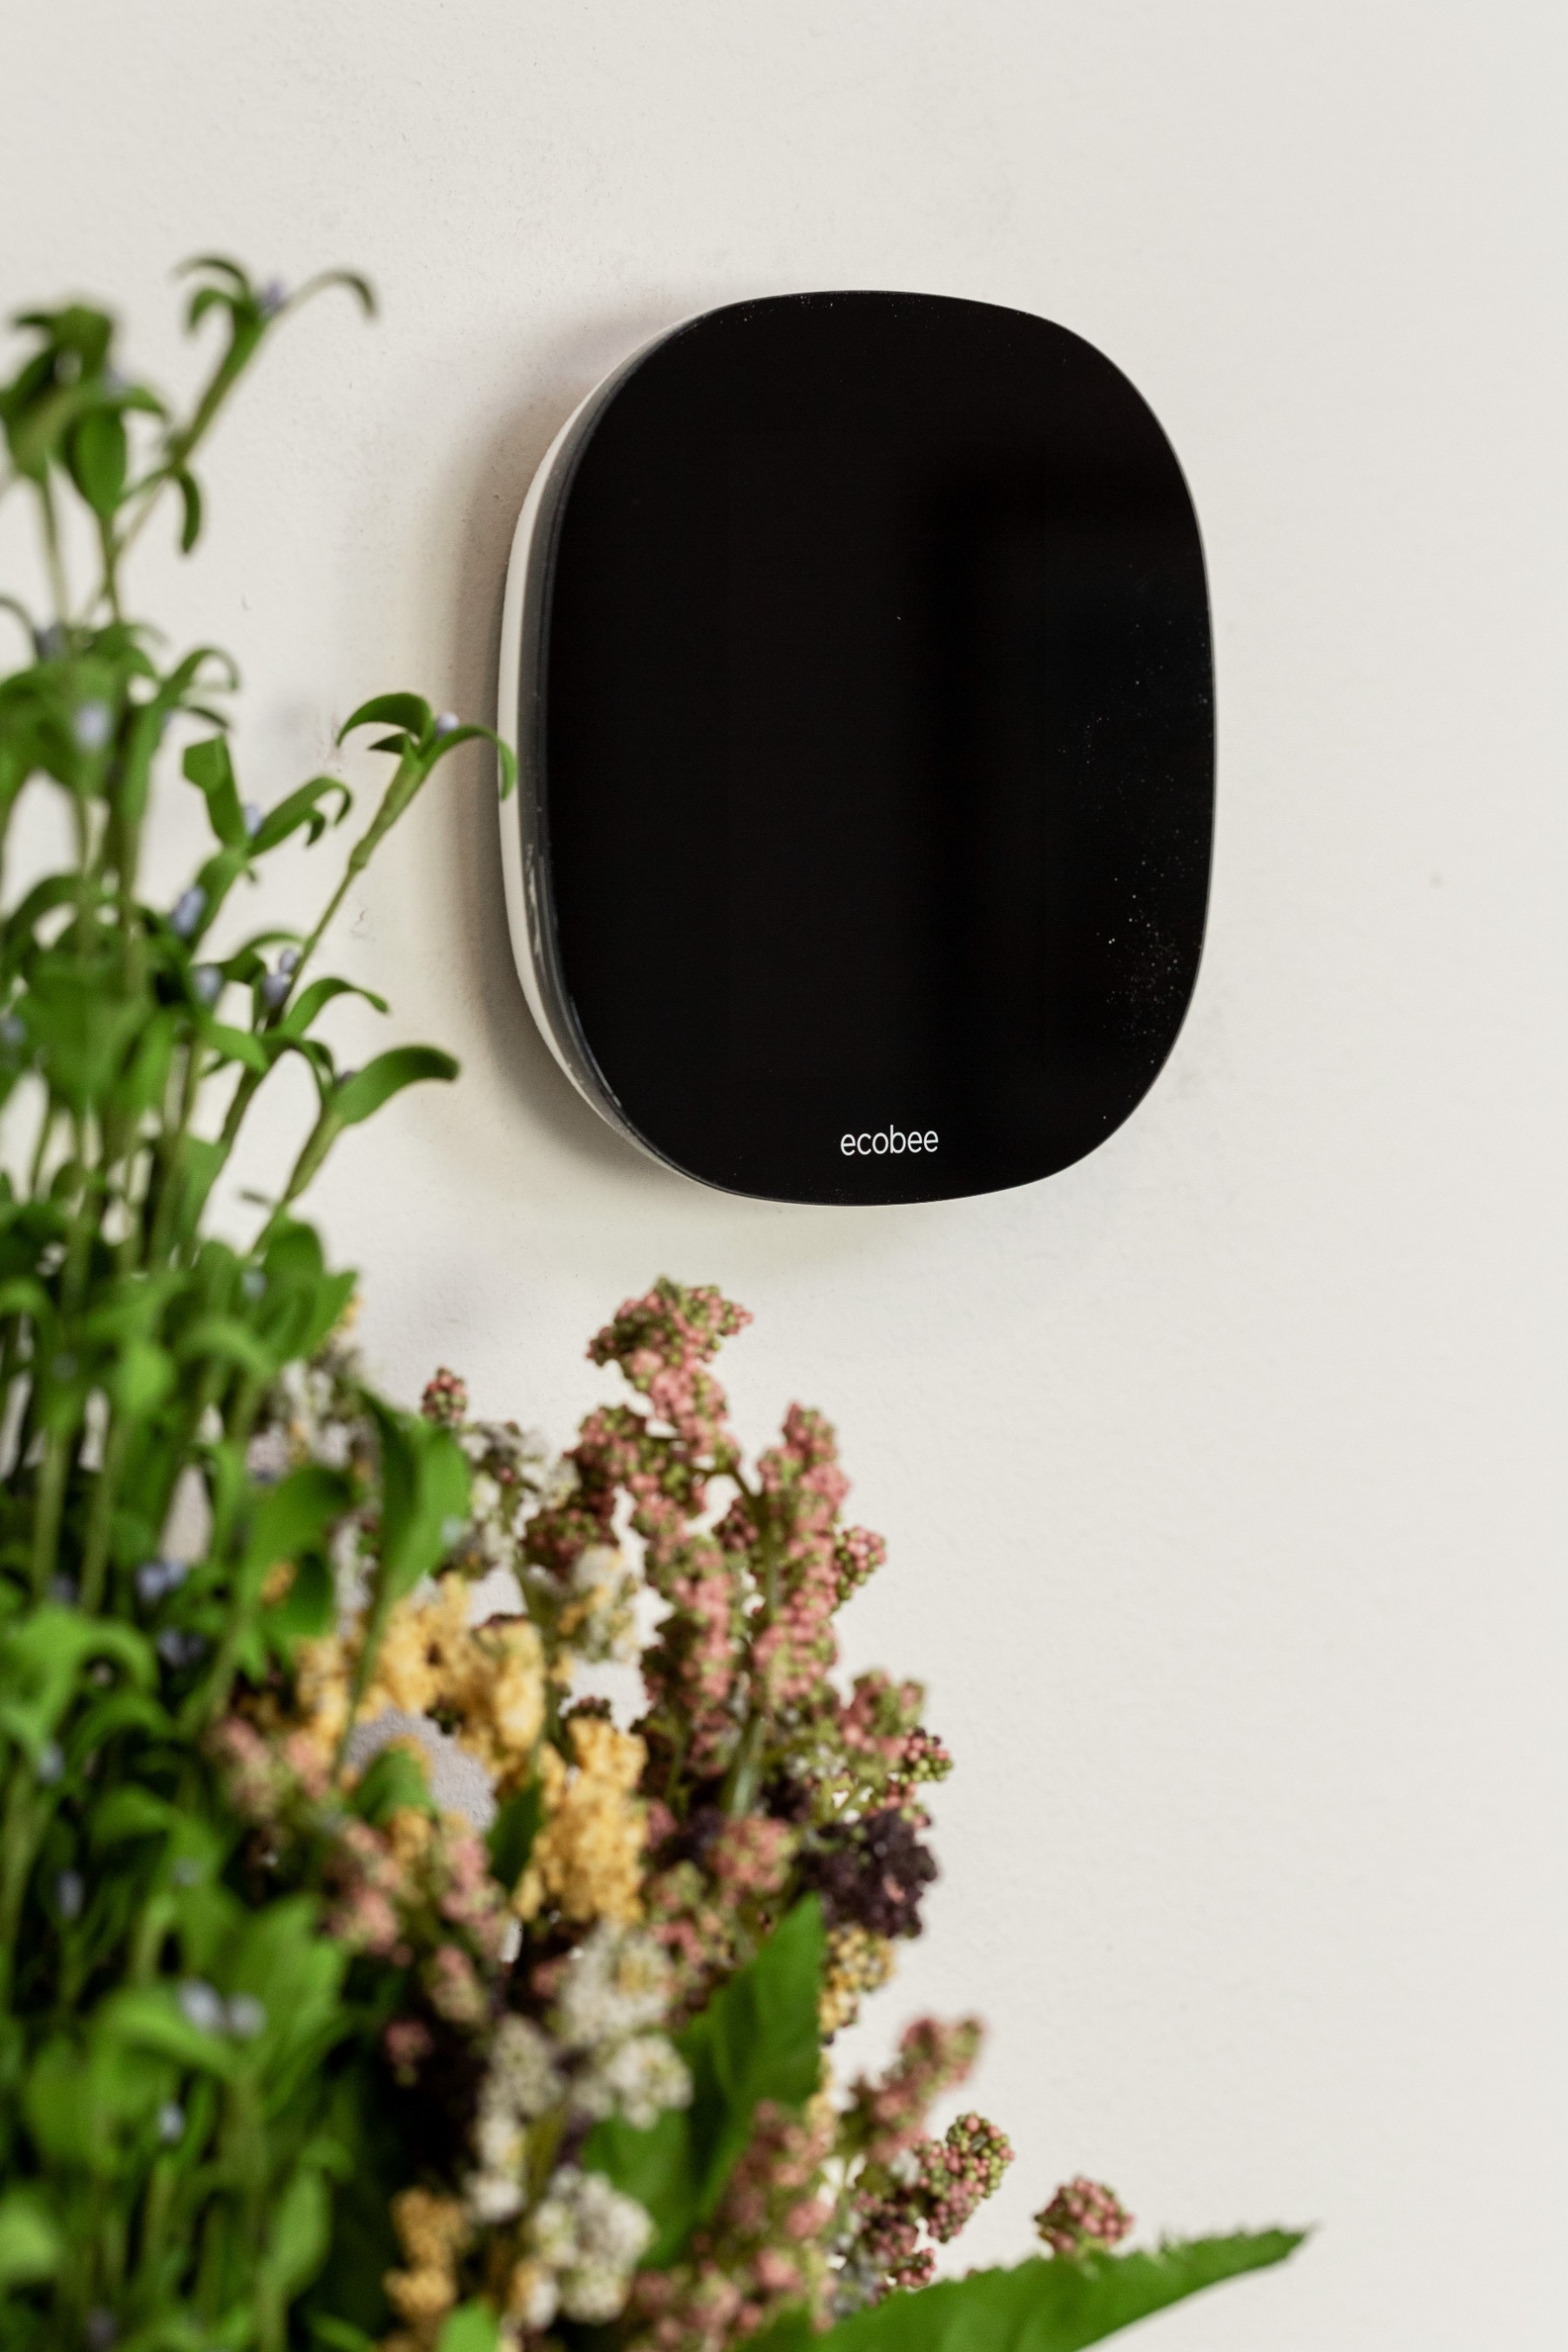 Exclusive to Clayton Built® homes in the off-site home building industry, ecobee smart thermostats are engineered for enhanced energy savings.